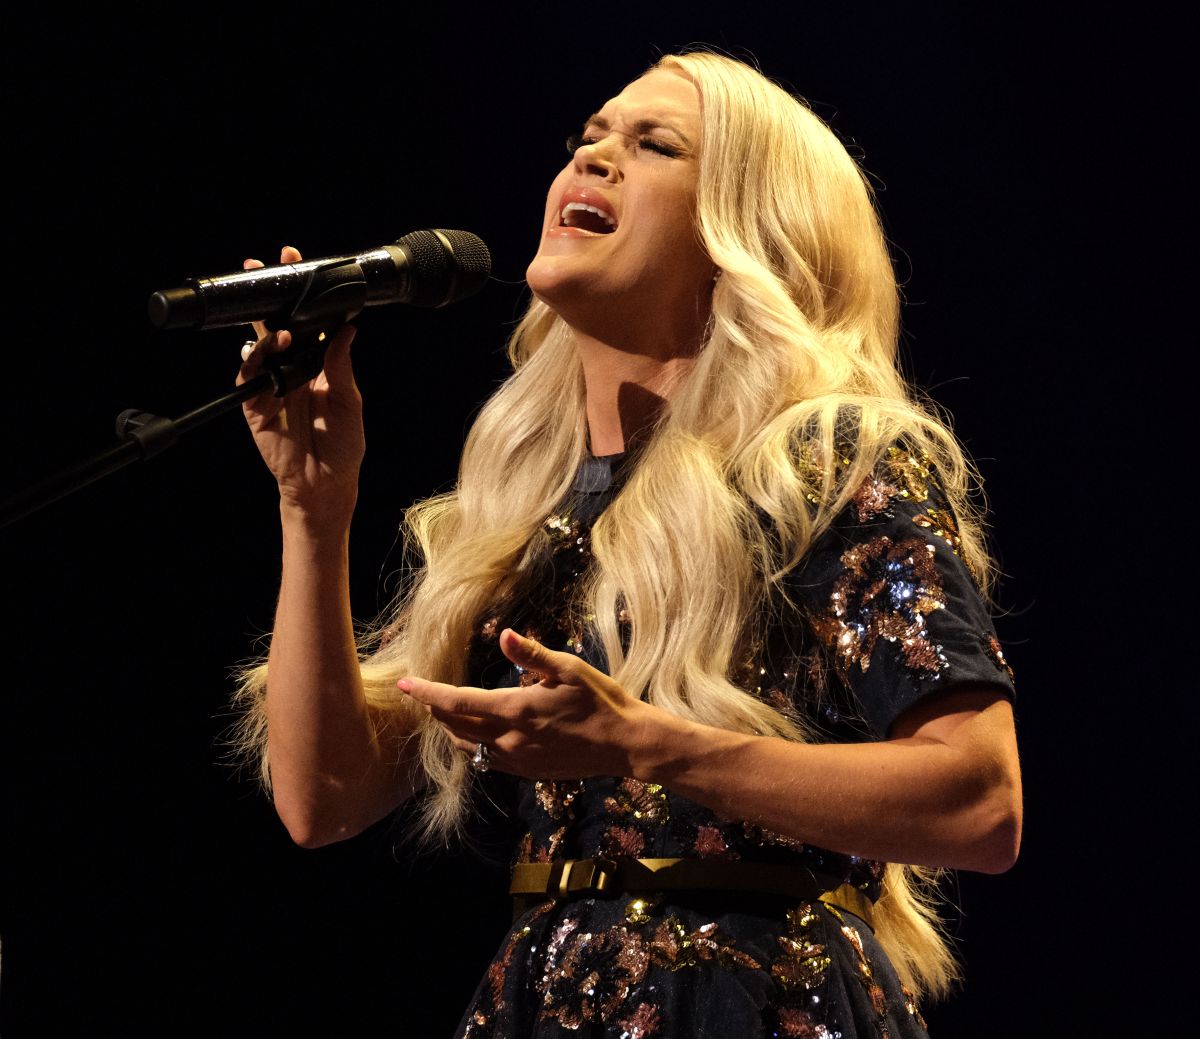 carrie-underwood-performs-at-grand-ole-opry-in-nashville-07-19-2019-9.jpg